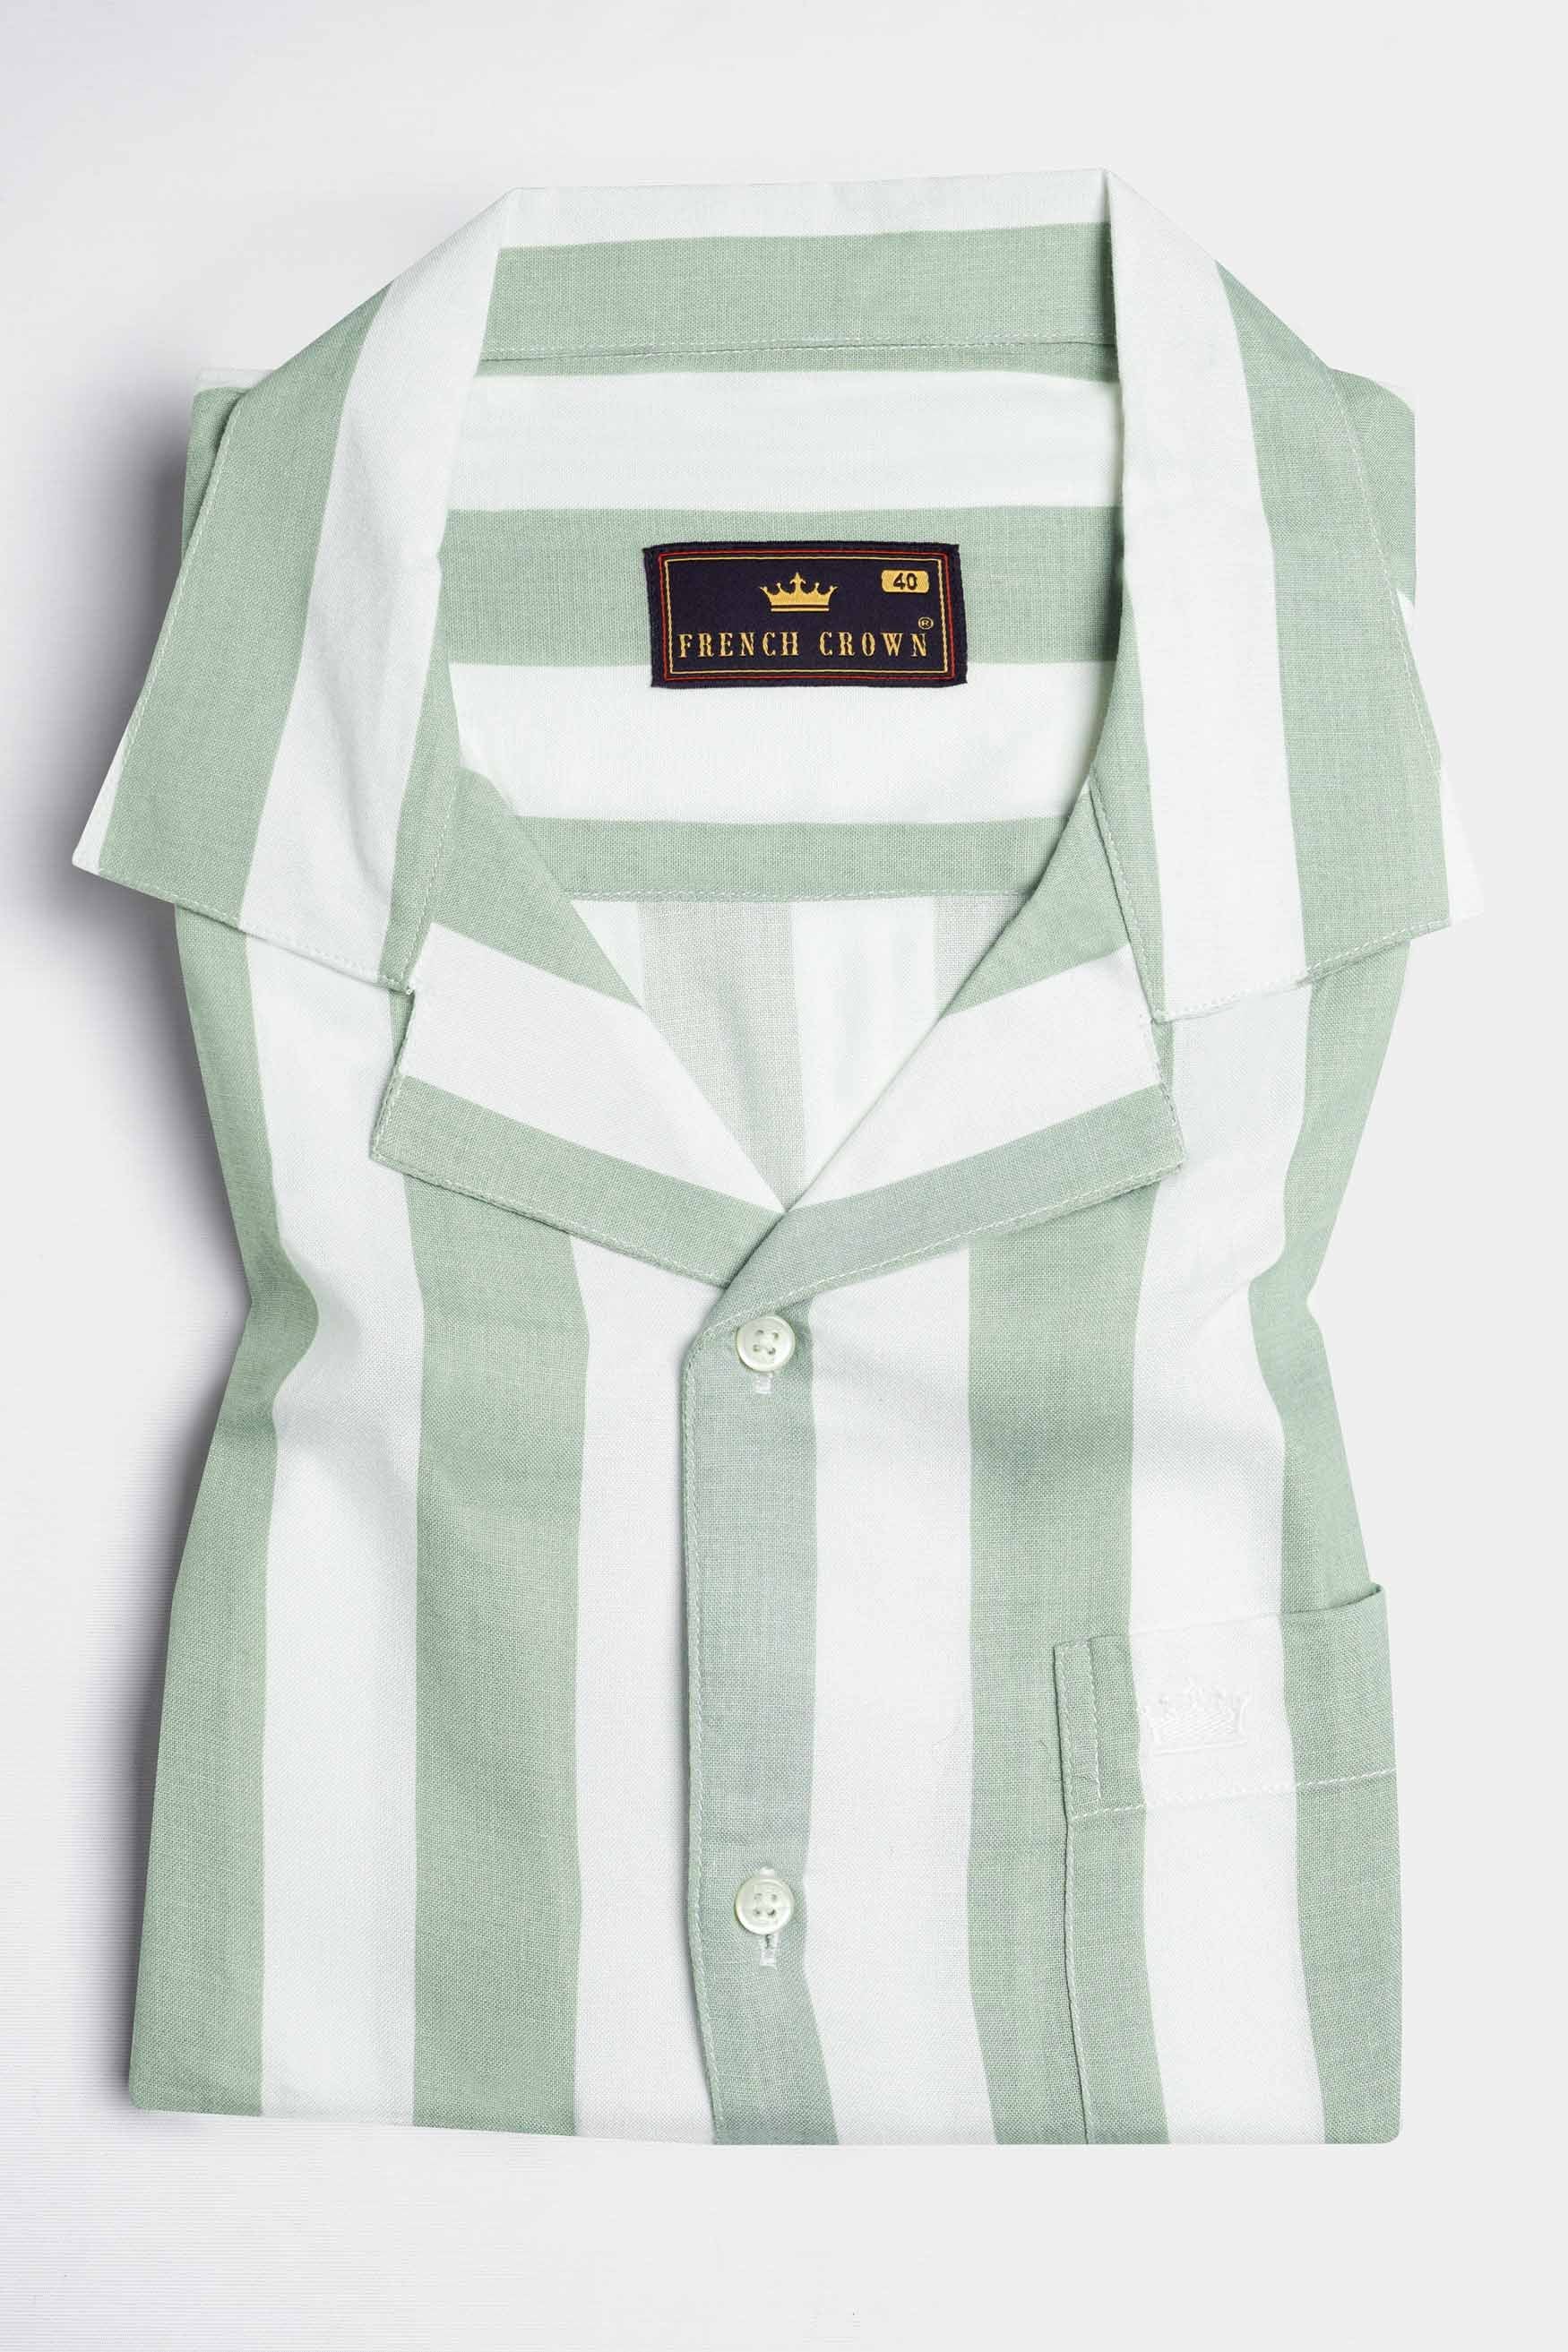 Bright White and Spring Rain Green Striped with Funky Patchwork Premium Tencel Designer Shirt 8795-CC-SS-E188-38, 8795-CC-SS-E188-39, 8795-CC-SS-E188-40, 8795-CC-SS-E188-42, 8795-CC-SS-E188-44, 8795-CC-SS-E188-46, 8795-CC-SS-E188-48, 8795-CC-SS-E188-50, 8795-CC-SS-E188-52